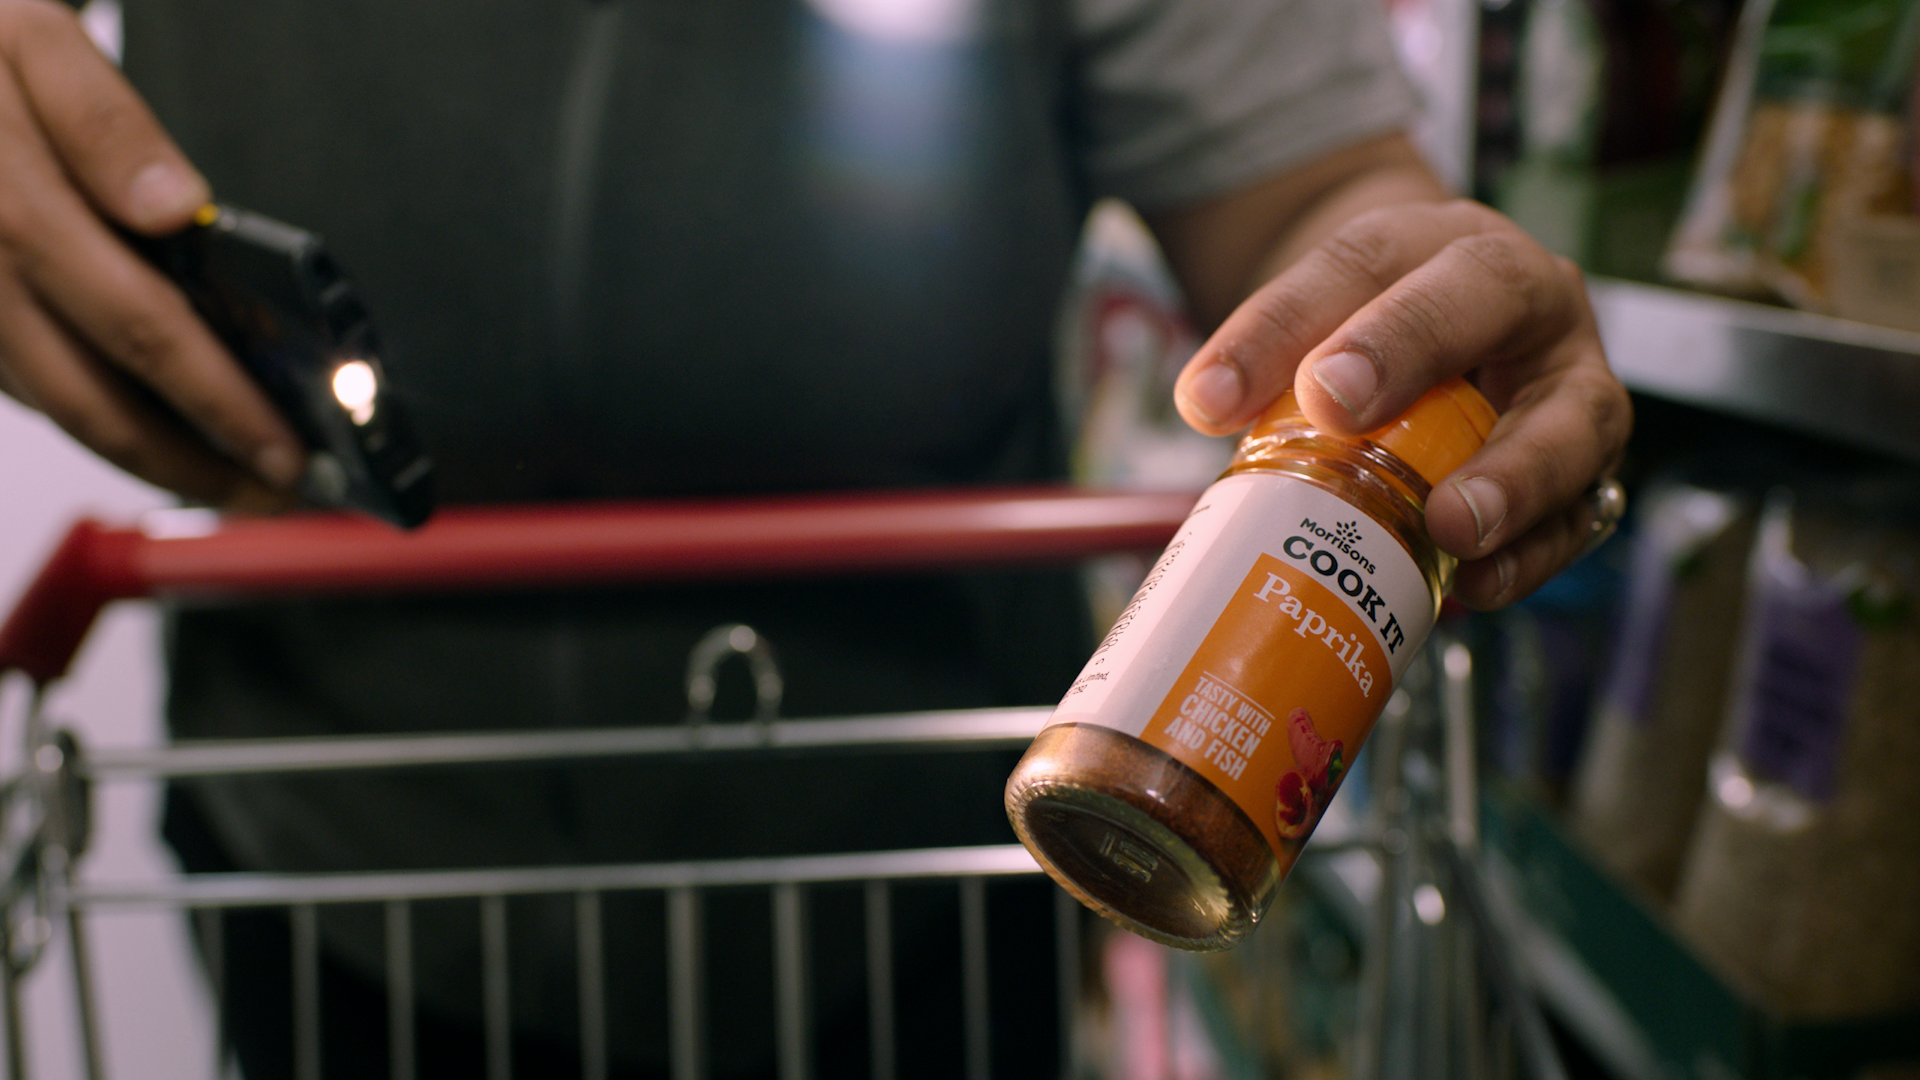 A Morrisons paprika seasoning, taken at Deliveroo HOP location on New Oxford Street in Central London.